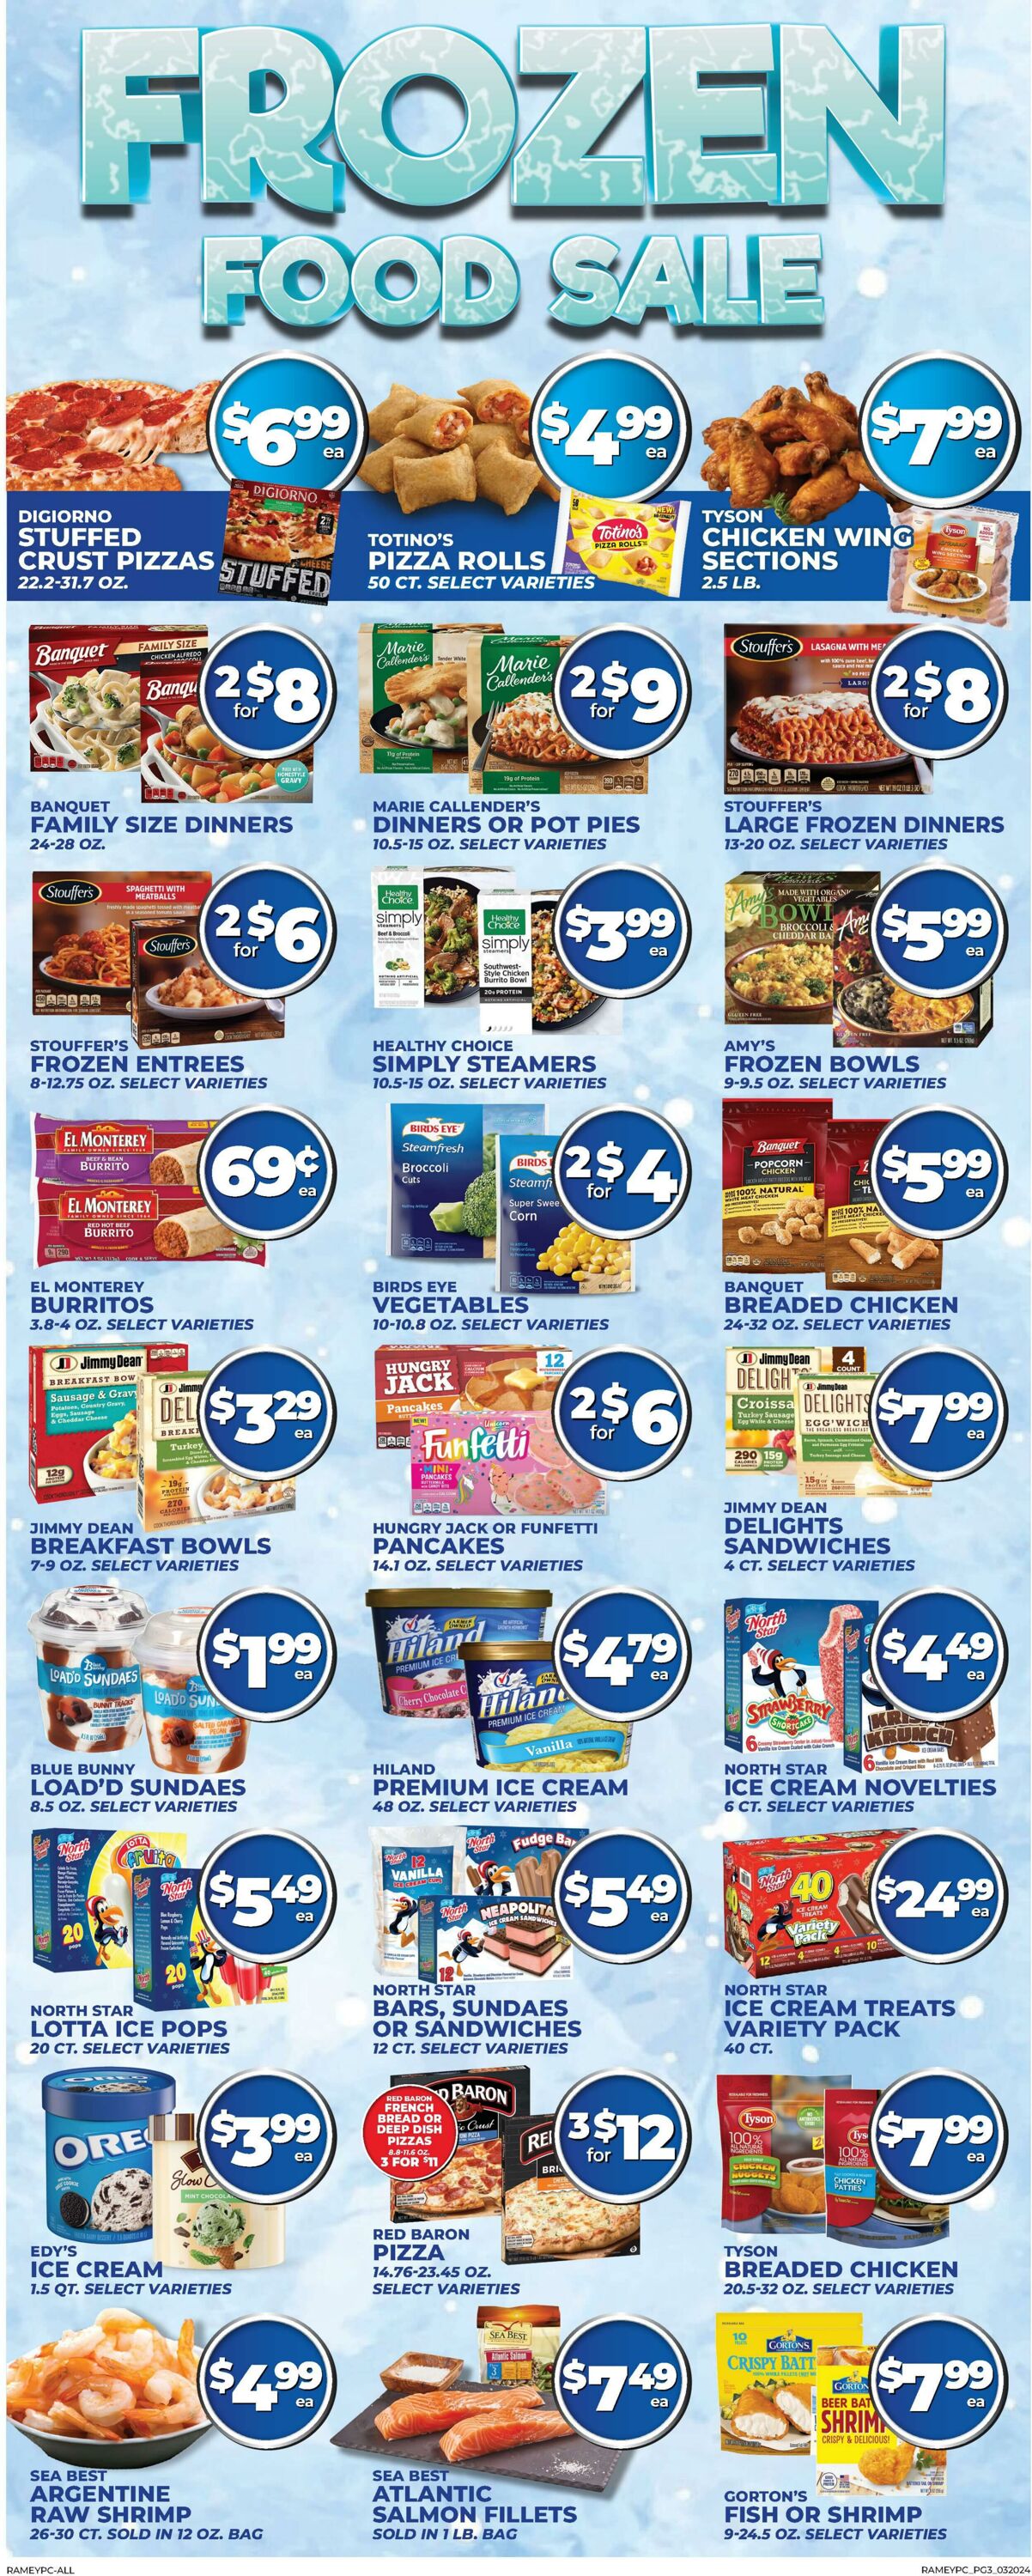 Weekly ad Price Cutter 03/20/2024 - 03/26/2024